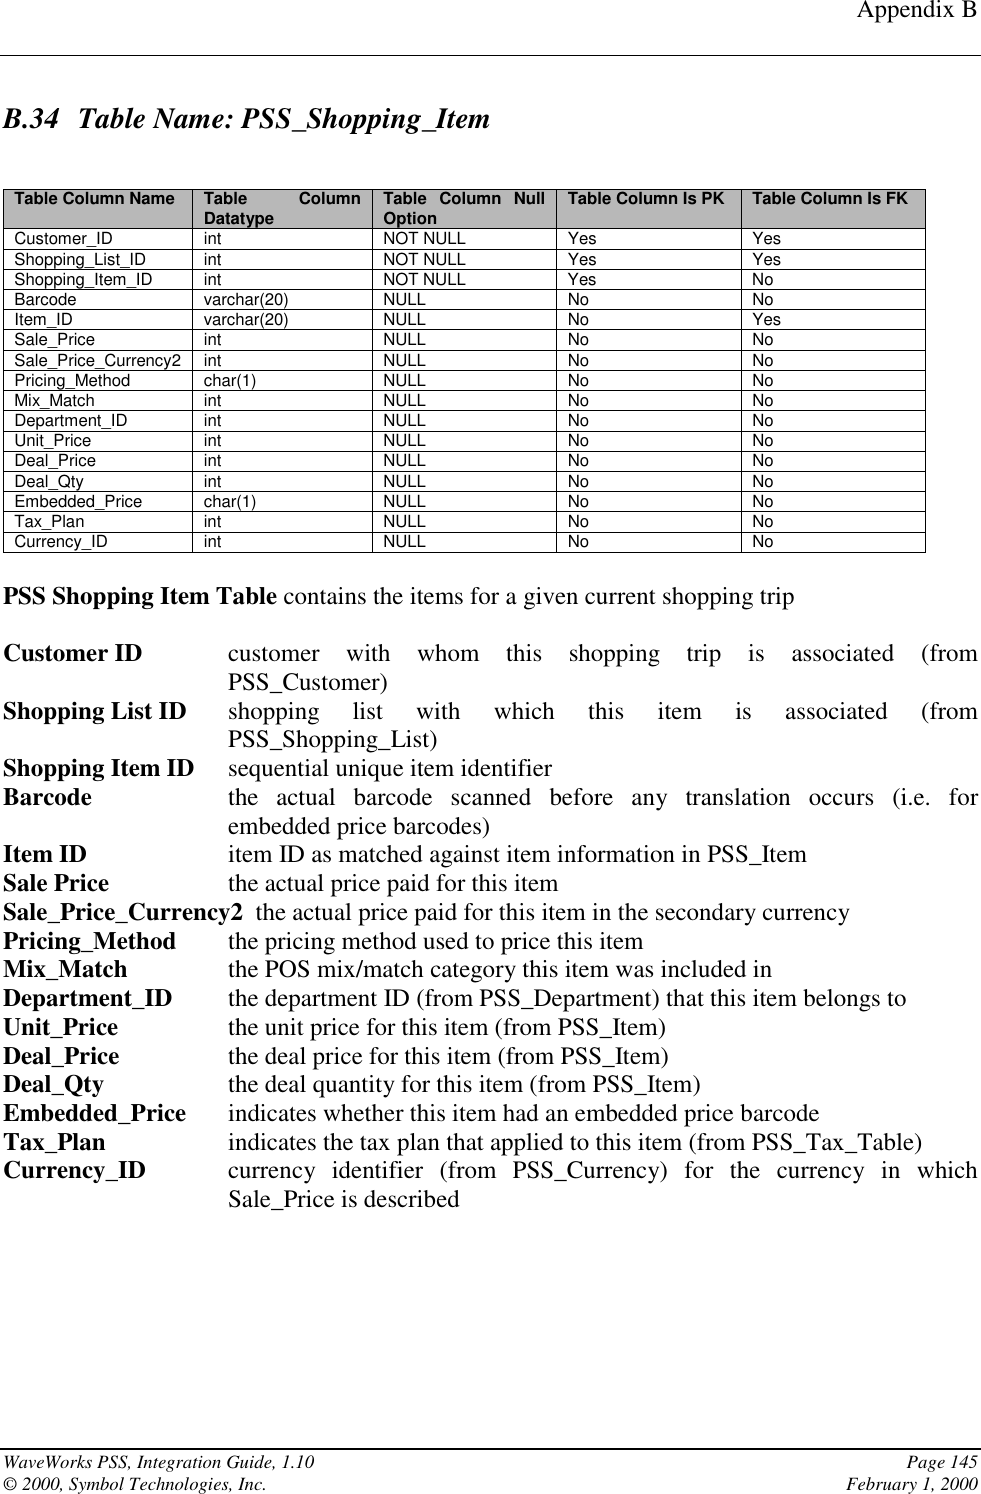 Appendix BWaveWorks PSS, Integration Guide, 1.10 Page 145© 2000, Symbol Technologies, Inc. February 1, 2000B.34 Table Name: PSS_Shopping_ItemTable Column Name Table ColumnDatatype Table Column NullOption Table Column Is PK Table Column Is FKCustomer_ID int NOT NULL Yes YesShopping_List_ID int NOT NULL Yes YesShopping_Item_ID int NOT NULL Yes NoBarcode varchar(20) NULL No NoItem_ID varchar(20) NULL No YesSale_Price int NULL No NoSale_Price_Currency2 int NULL No NoPricing_Method char(1) NULL No NoMix_Match int NULL No NoDepartment_ID int NULL No NoUnit_Price int NULL No NoDeal_Price int NULL No NoDeal_Qty int NULL No NoEmbedded_Price char(1) NULL No NoTax_Plan int NULL No NoCurrency_ID int NULL No NoPSS Shopping Item Table contains the items for a given current shopping tripCustomer ID customer with whom this shopping trip is associated (fromPSS_Customer)Shopping List ID shopping list with which this item is associated (fromPSS_Shopping_List)Shopping Item ID sequential unique item identifierBarcode the actual barcode scanned before any translation occurs (i.e. forembedded price barcodes)Item ID item ID as matched against item information in PSS_ItemSale Price the actual price paid for this itemSale_Price_Currency2  the actual price paid for this item in the secondary currencyPricing_Method the pricing method used to price this itemMix_Match the POS mix/match category this item was included inDepartment_ID the department ID (from PSS_Department) that this item belongs toUnit_Price the unit price for this item (from PSS_Item)Deal_Price the deal price for this item (from PSS_Item)Deal_Qty the deal quantity for this item (from PSS_Item)Embedded_Price indicates whether this item had an embedded price barcodeTax_Plan indicates the tax plan that applied to this item (from PSS_Tax_Table)Currency_ID currency identifier (from PSS_Currency) for the currency in whichSale_Price is described